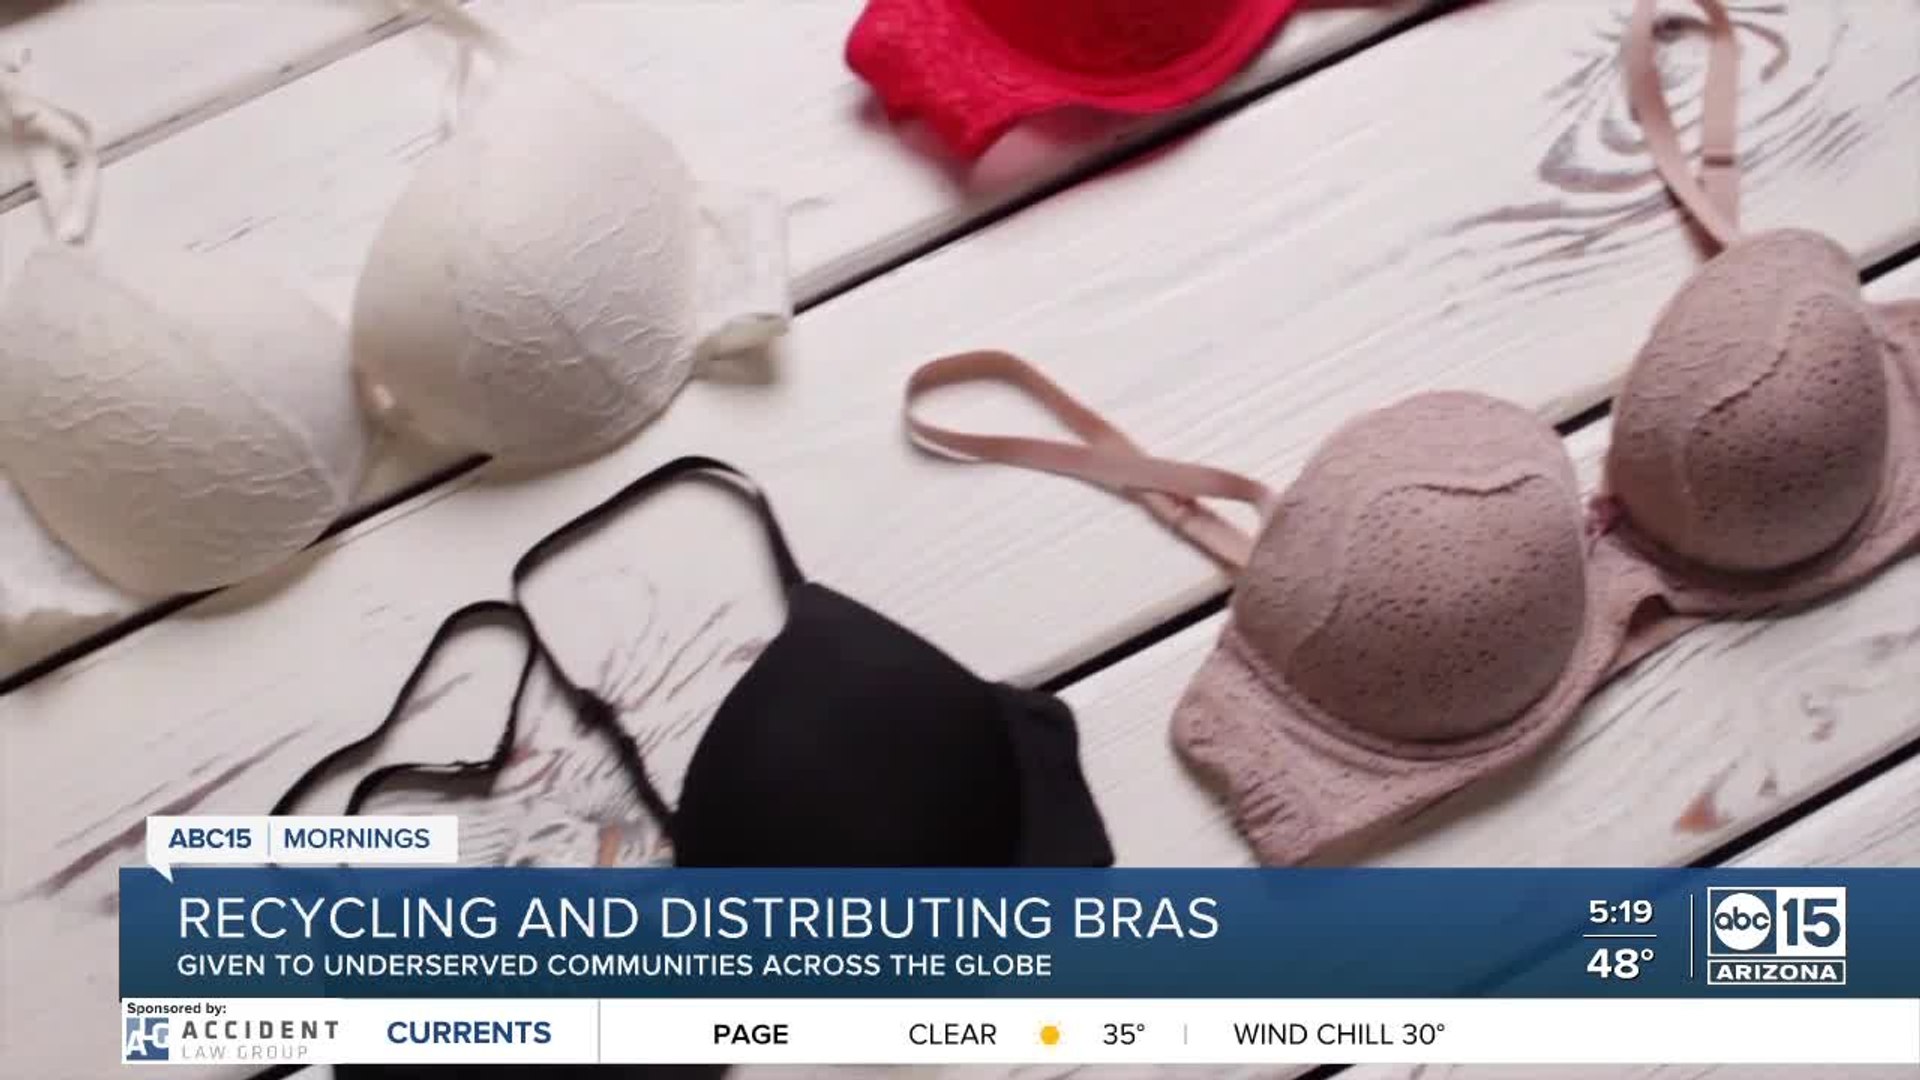 Recycling and distributing bras to women in need - video Dailymotion